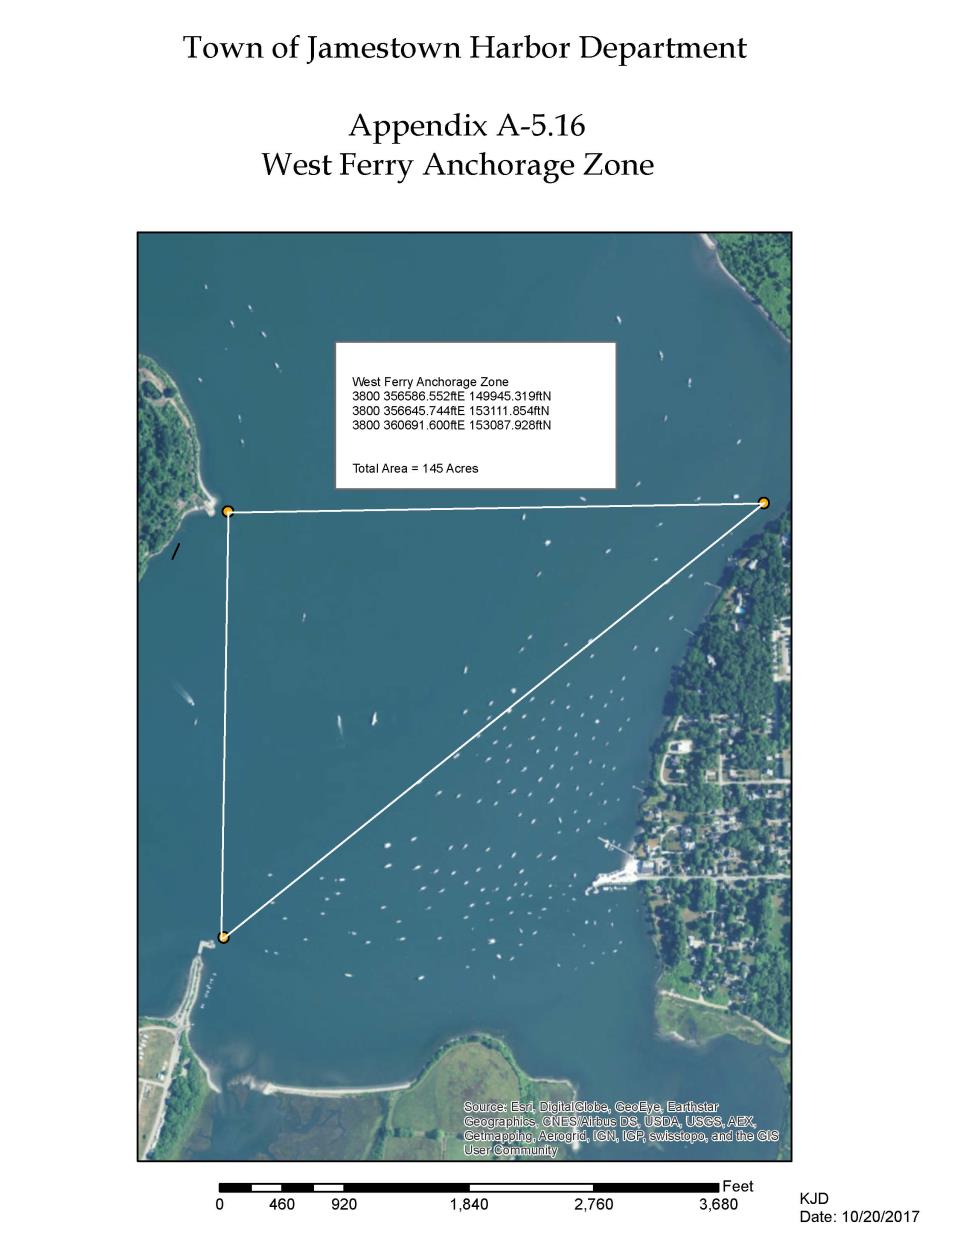 West Ferry Anchorage Area